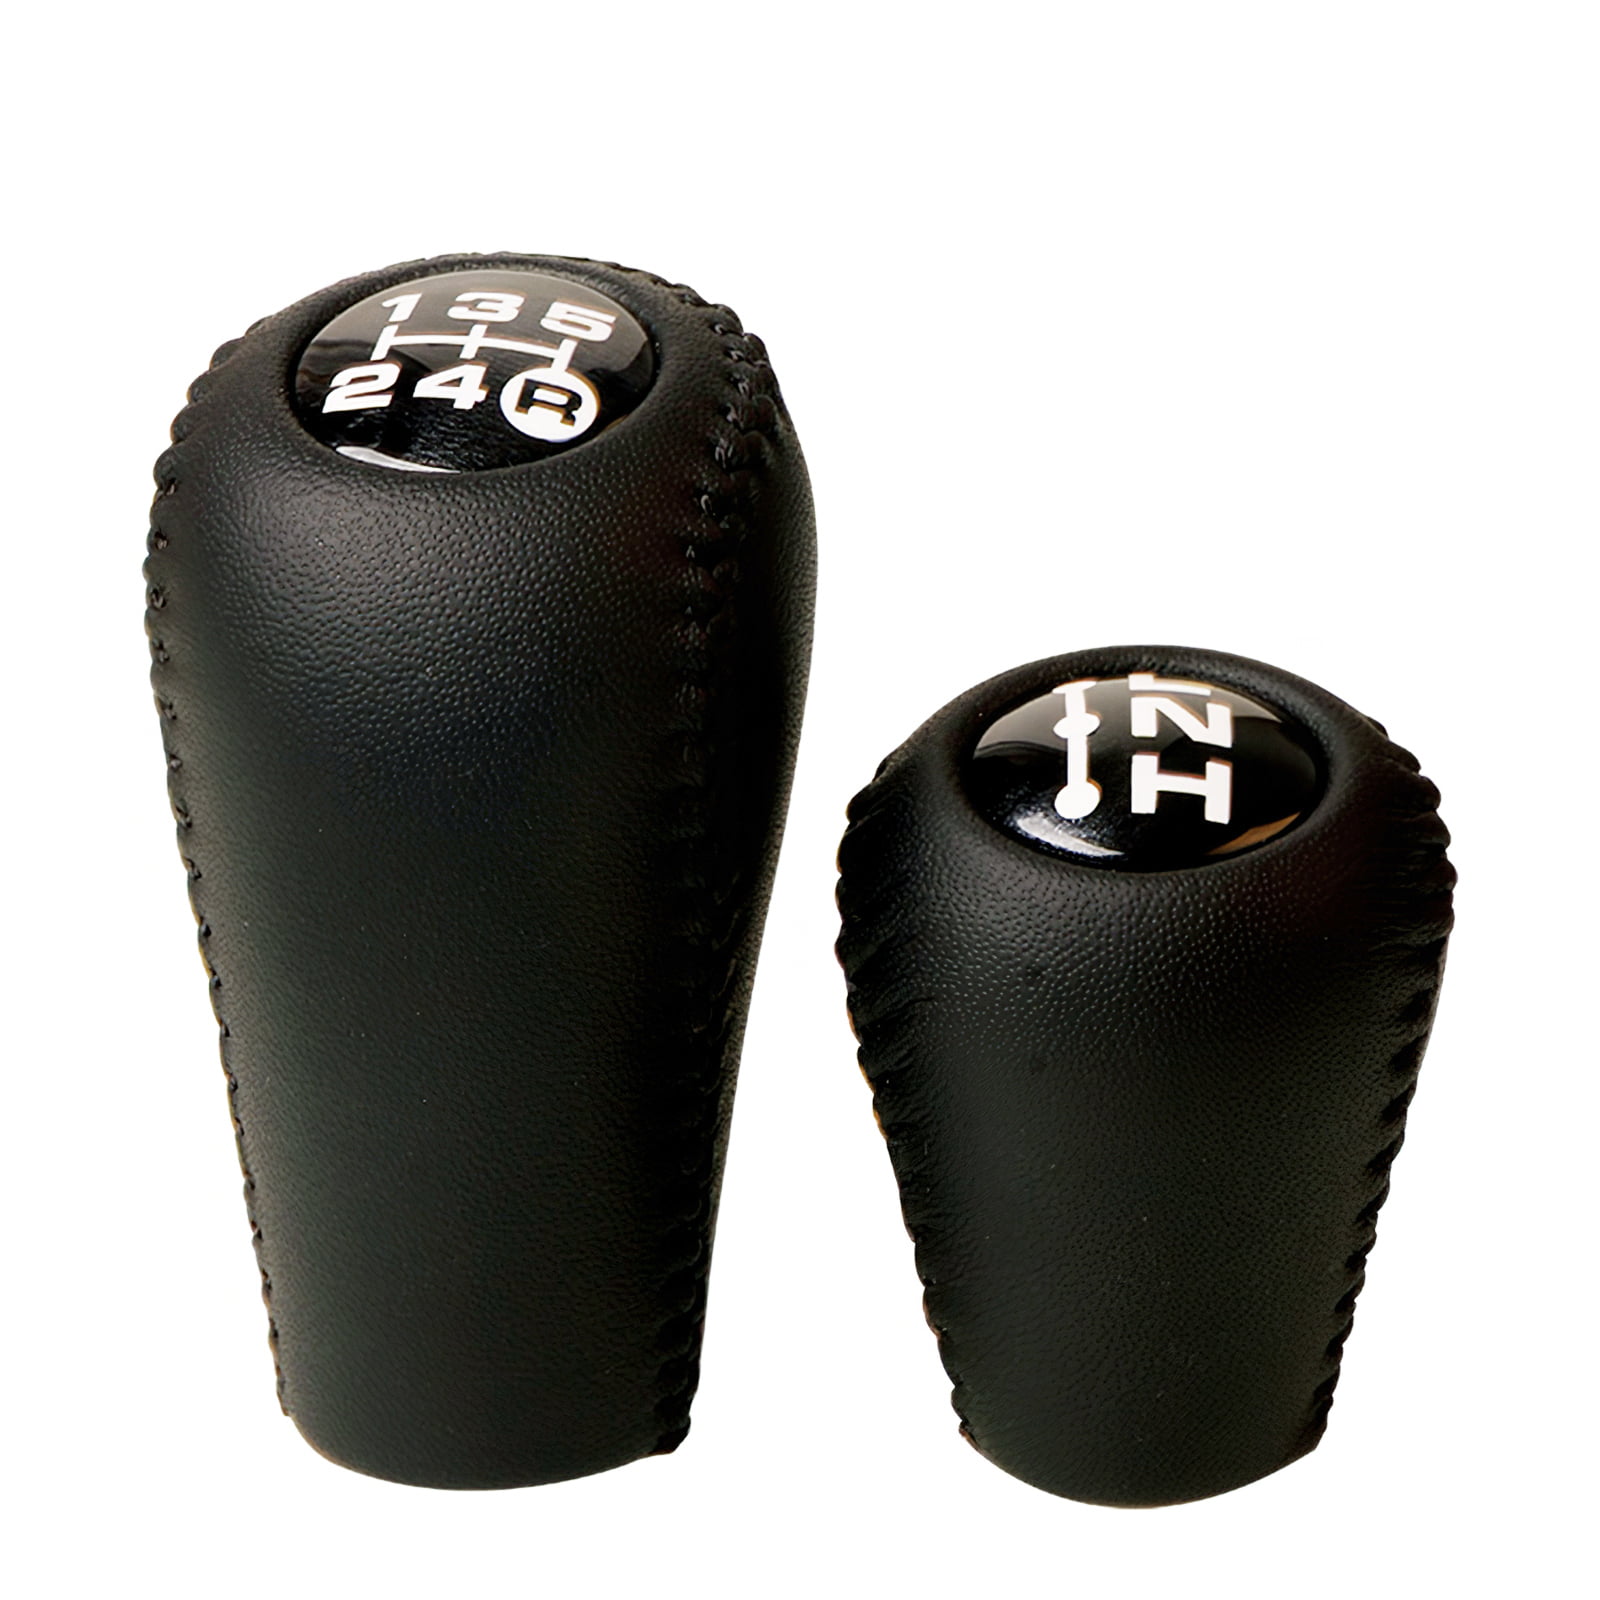 New AT Gear Stick Shift Knob for Toyota LAND CRUISER 2004-2009